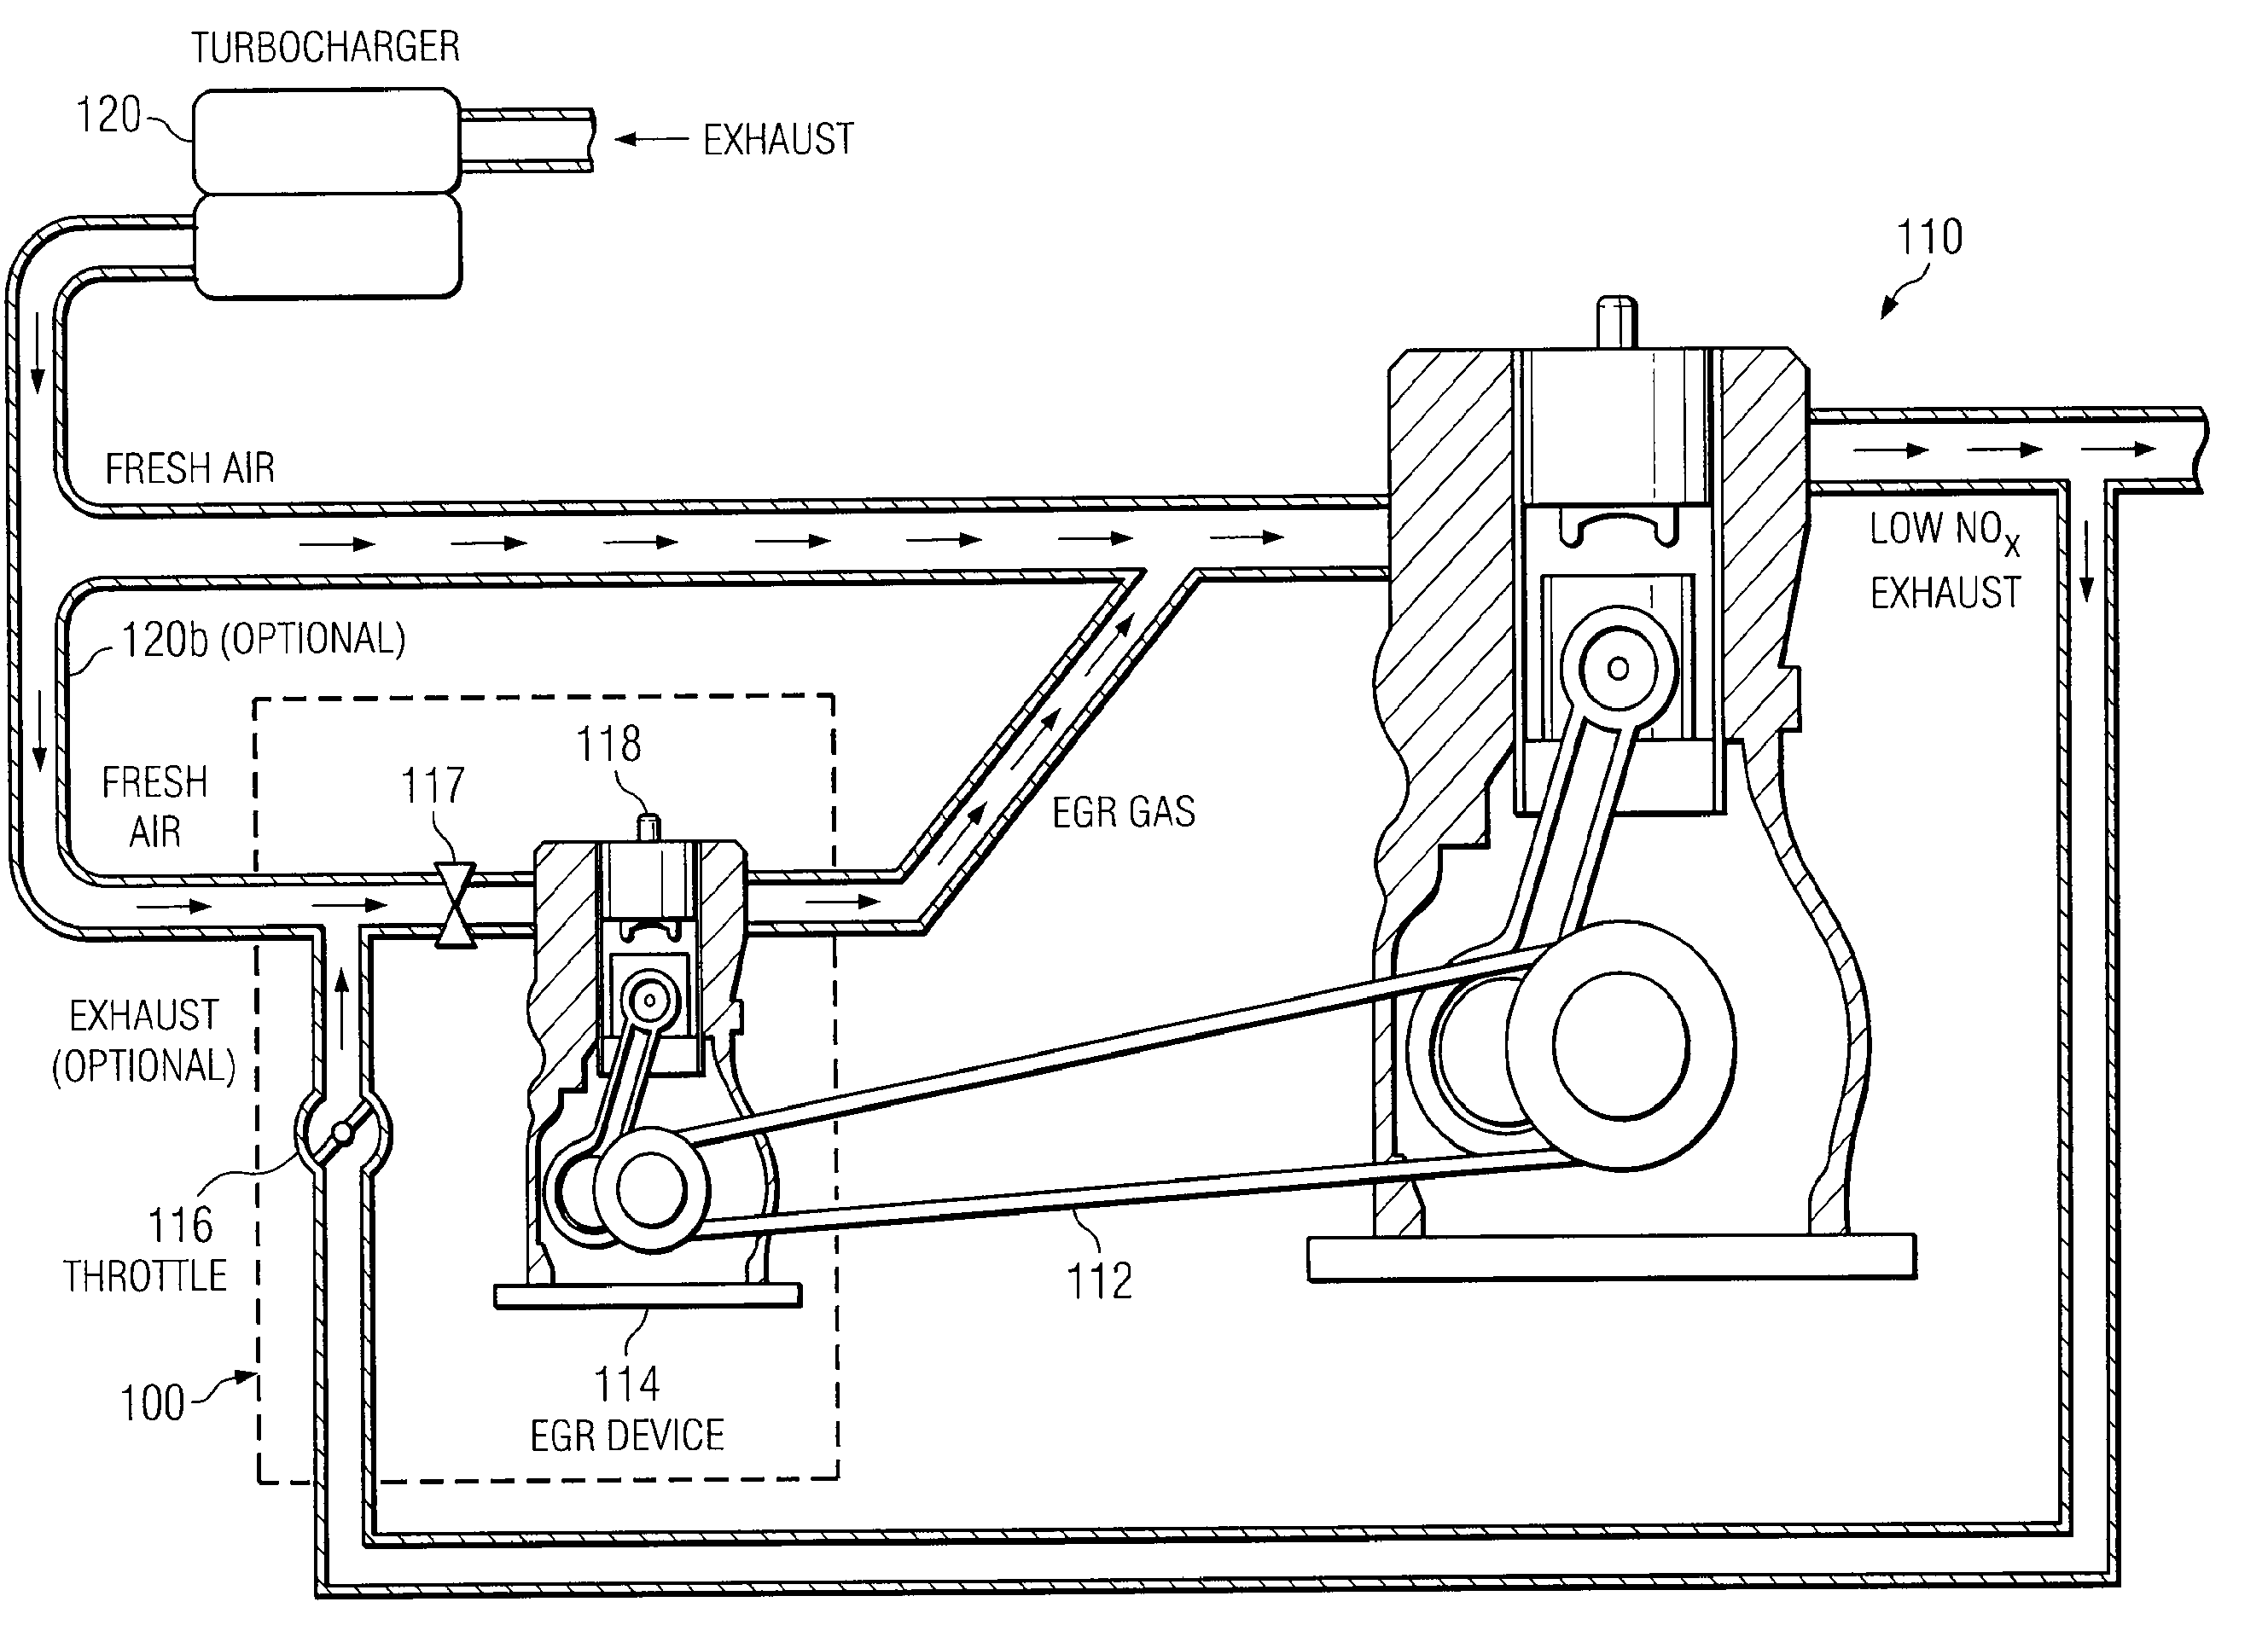 Secondary internal combustion device for providing exhaust gas to EGR-equipped engine